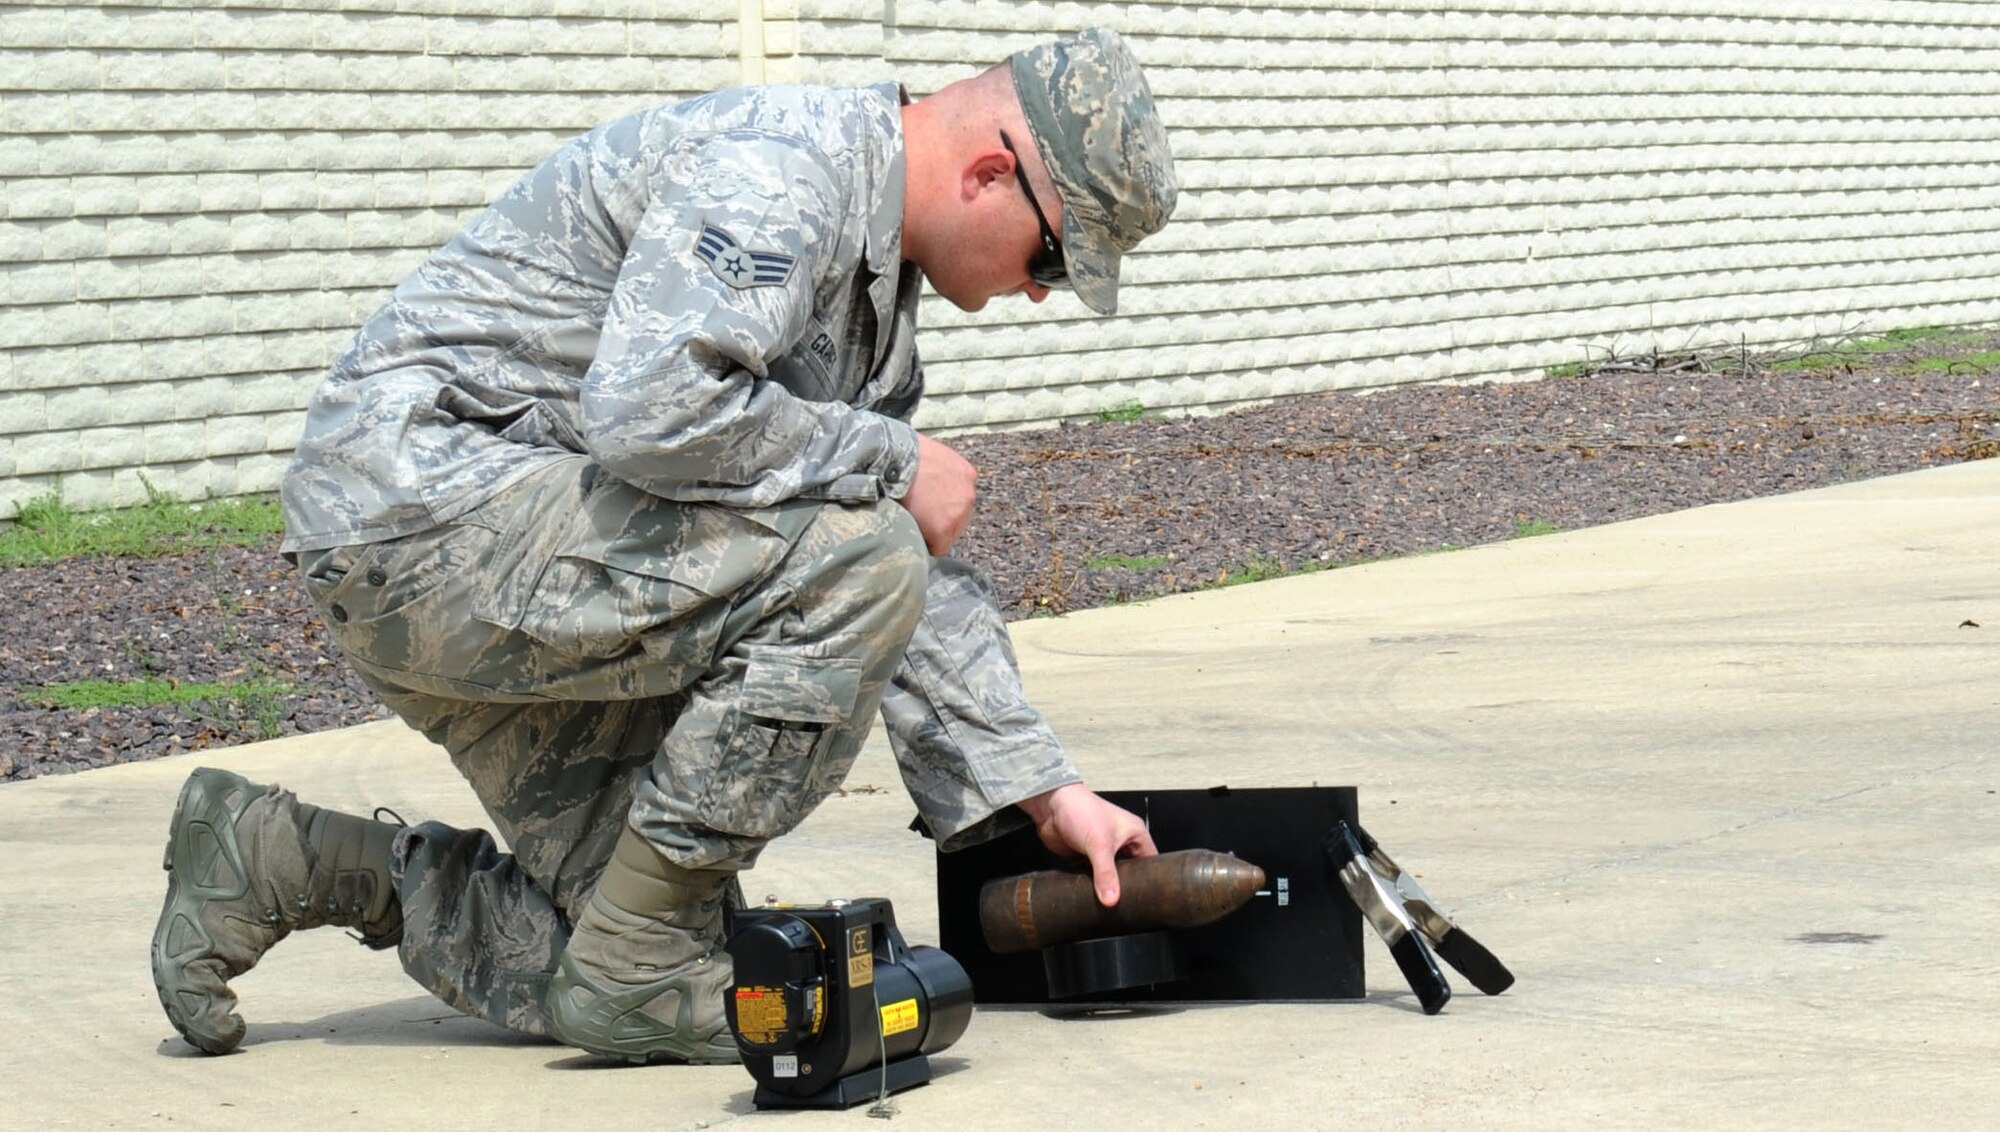 Senior Airman Ryan Garvey, 22nd Civil Engineer Squadron explosive ordnance disposal technician, sets up a portable X-ray machine, Aug. 8, 2016, in Marion County, Kan. Garvey X-rayed a munition item to verify its contents before it was destroyed. (U.S. Air Force photo/Senior Airman Tara Fadenrecht)